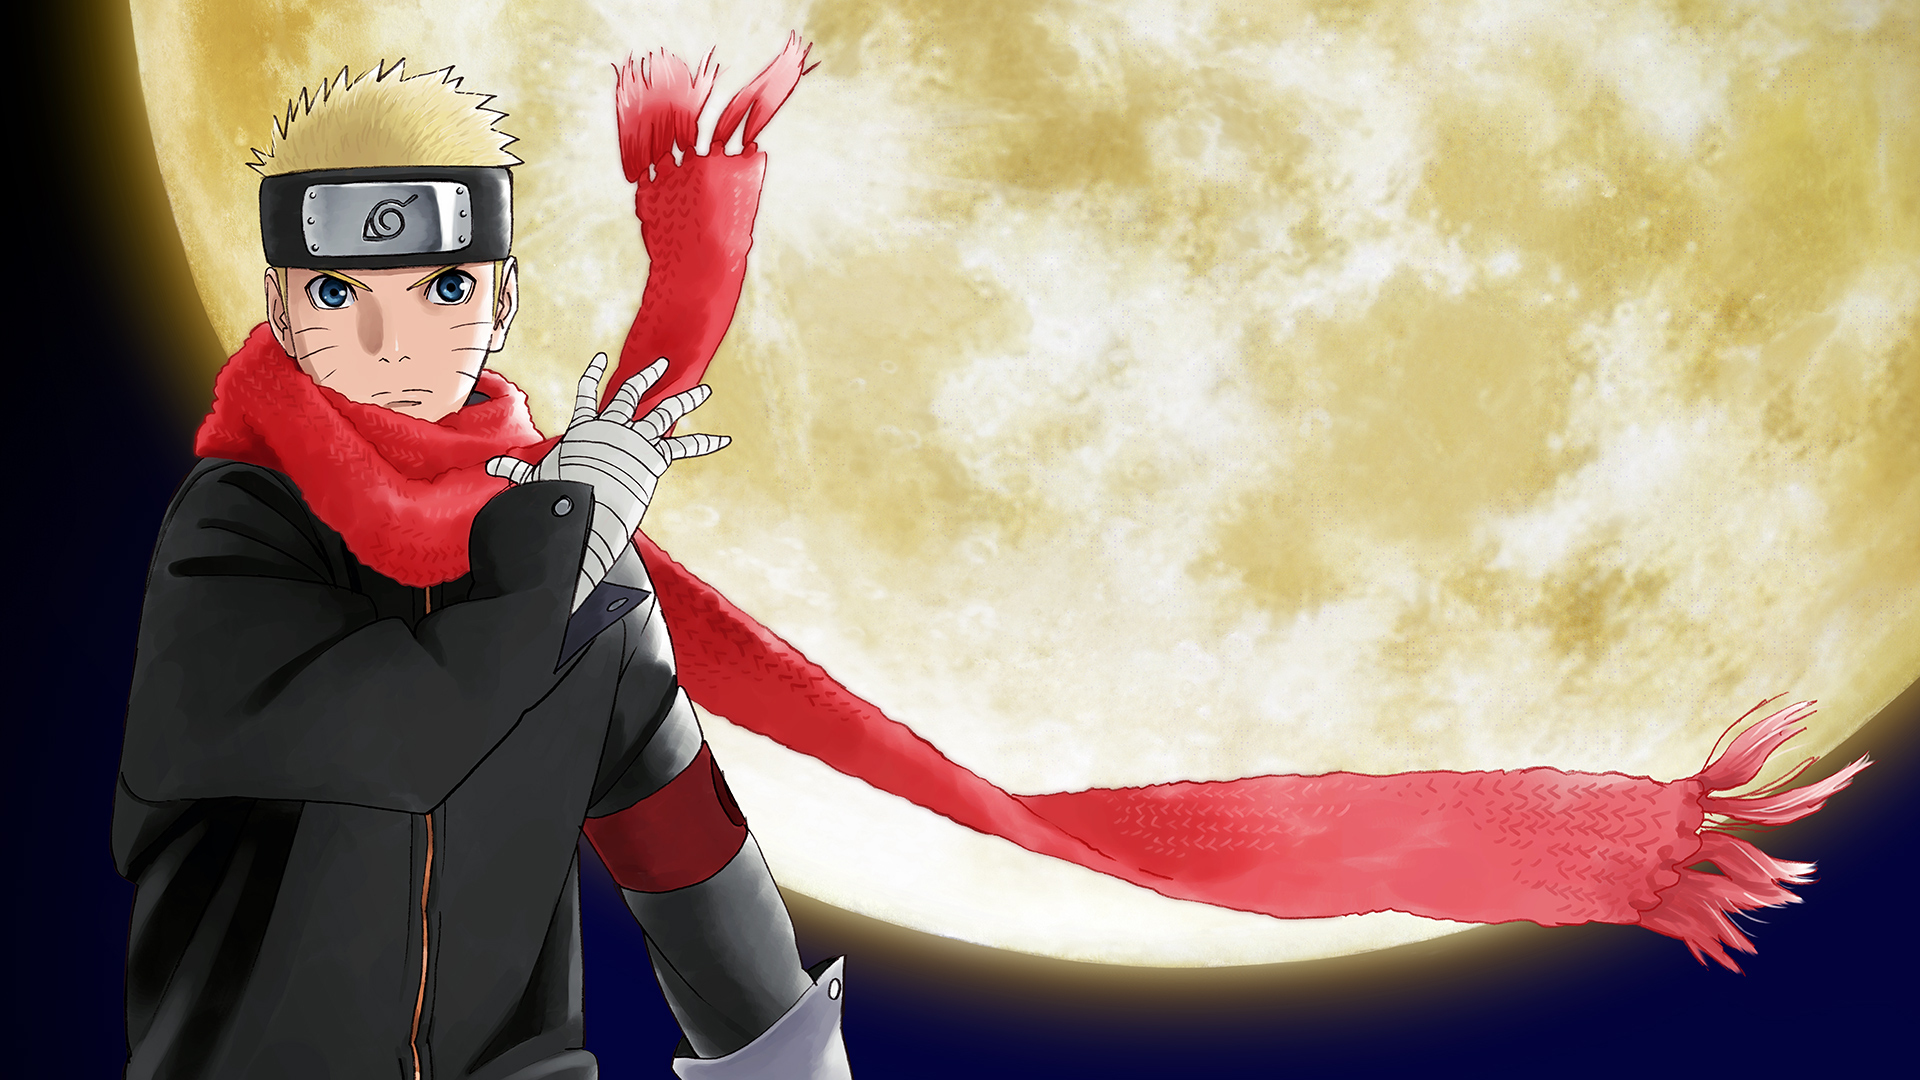 10+ The Last: Naruto the Movie HD Wallpapers and Backgrounds